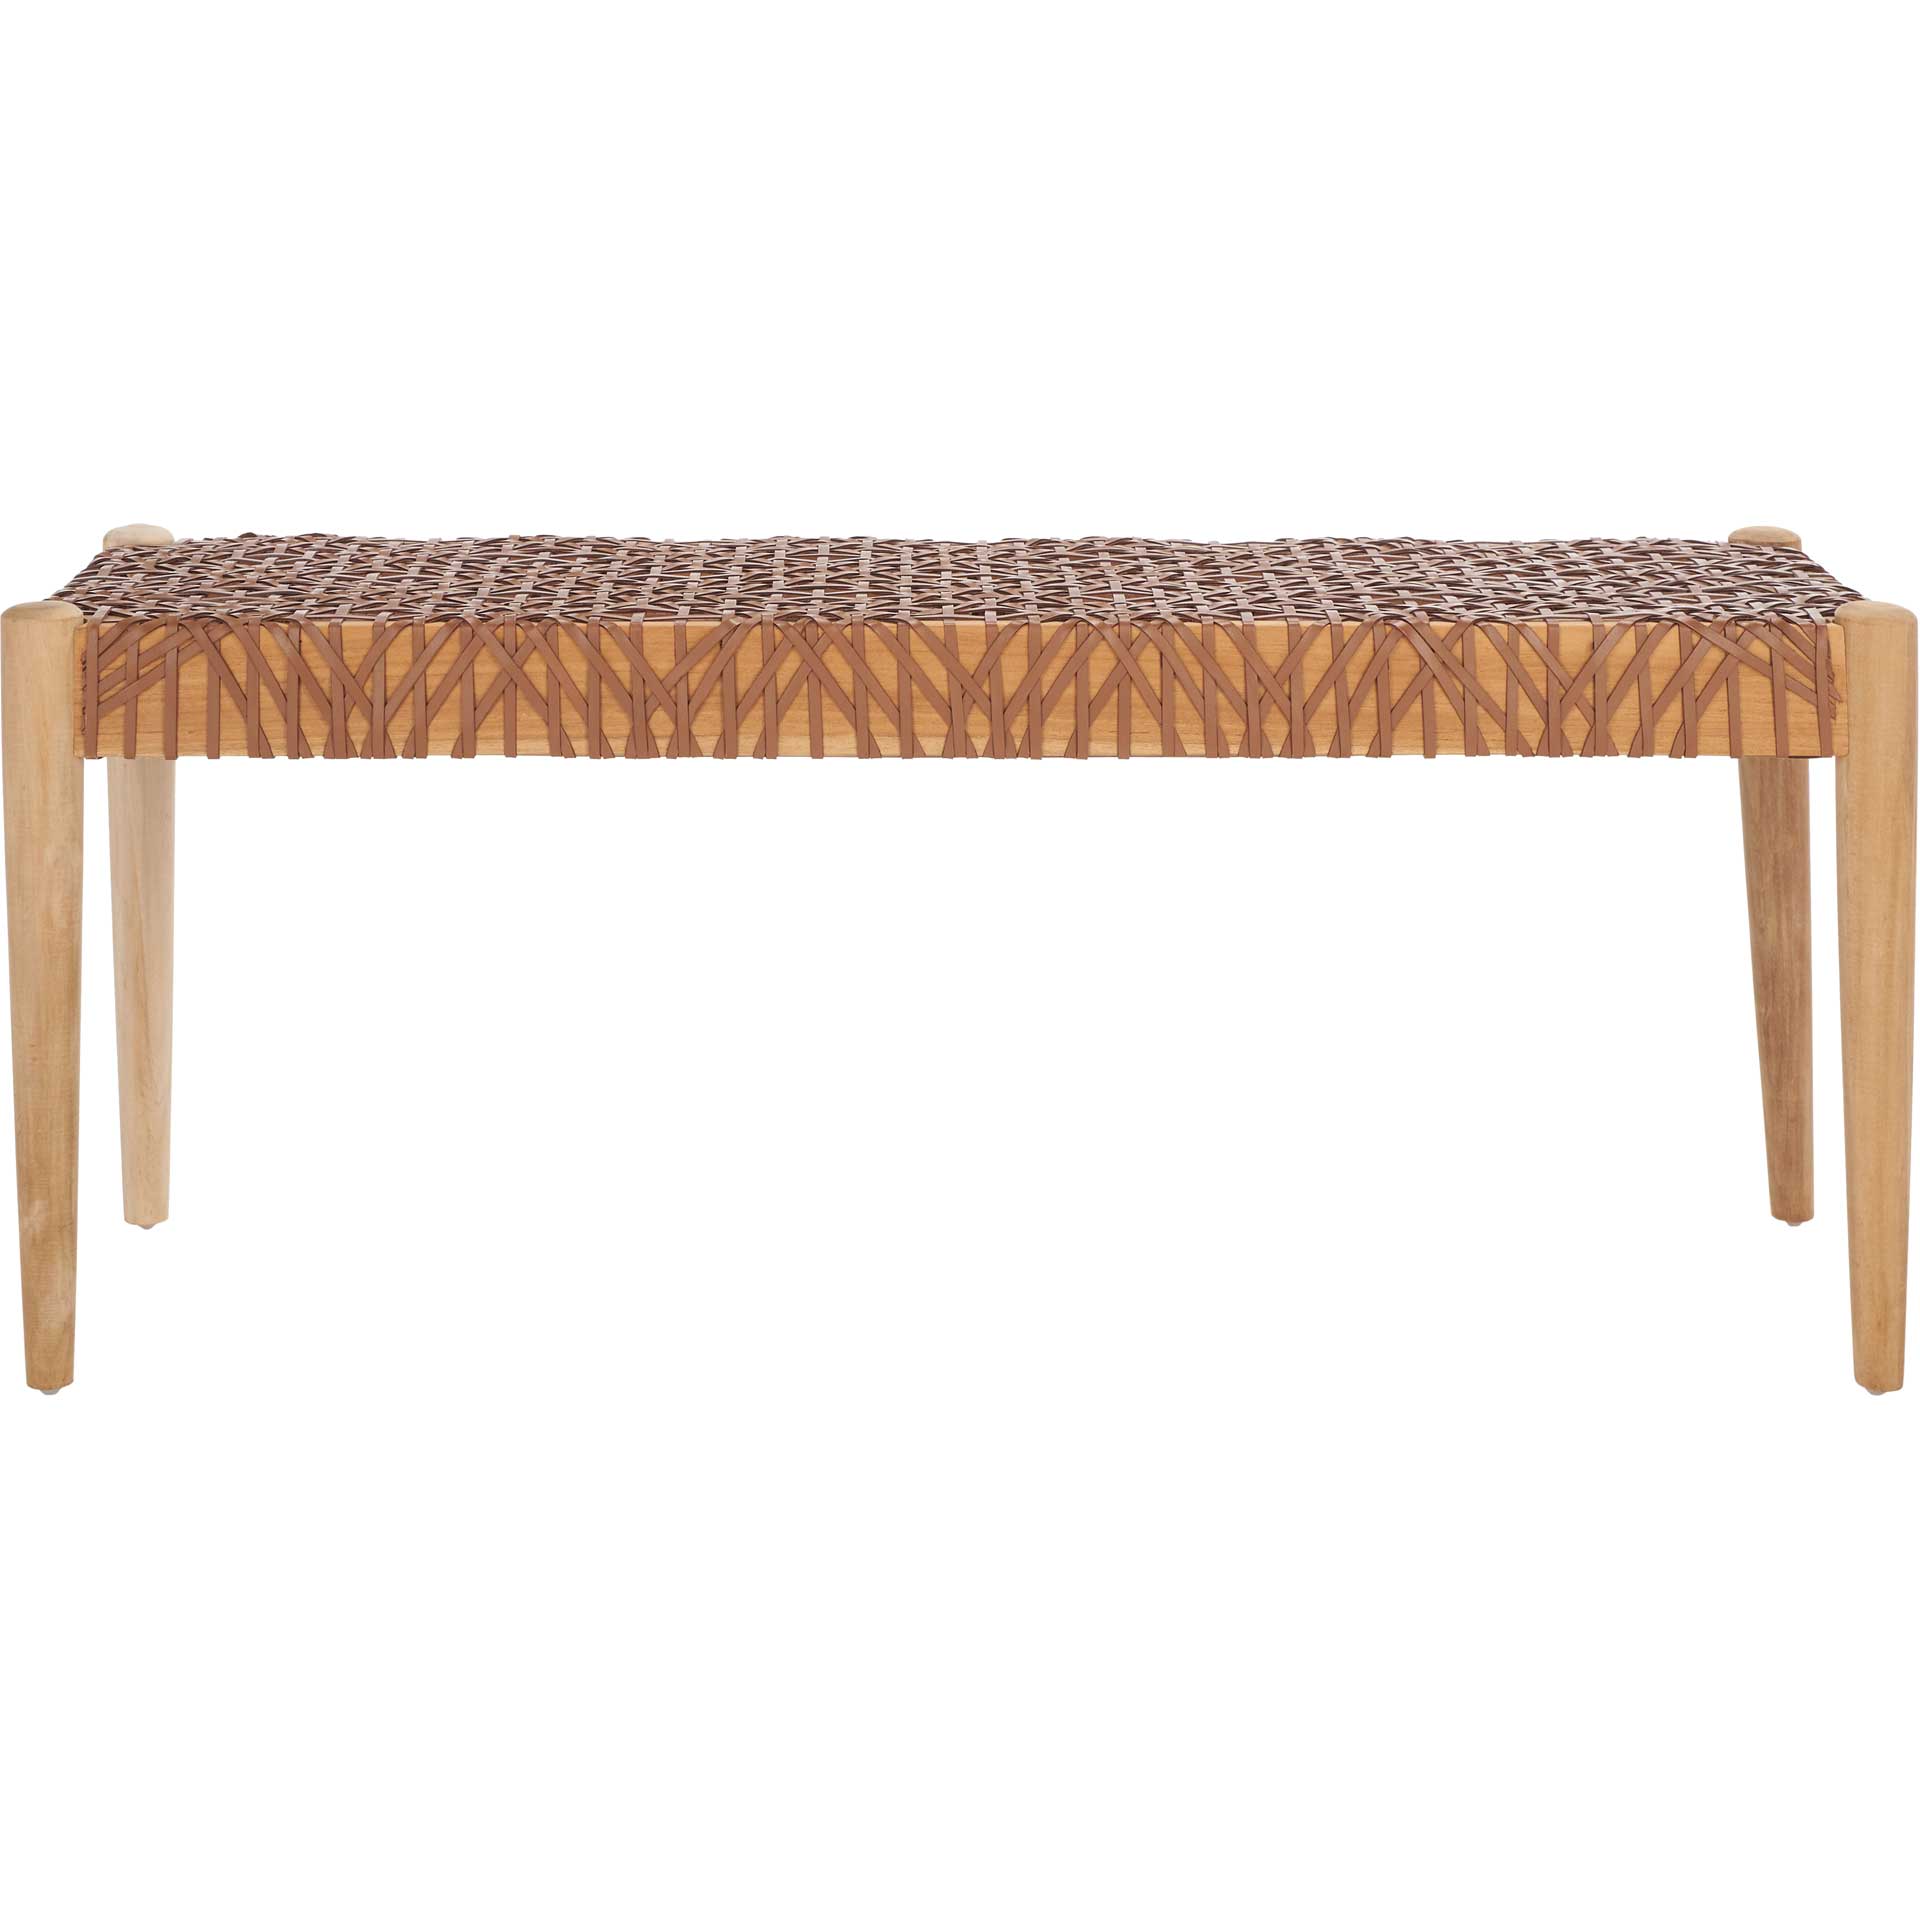 Baize Leather Weave Bench Light Honey/Natural